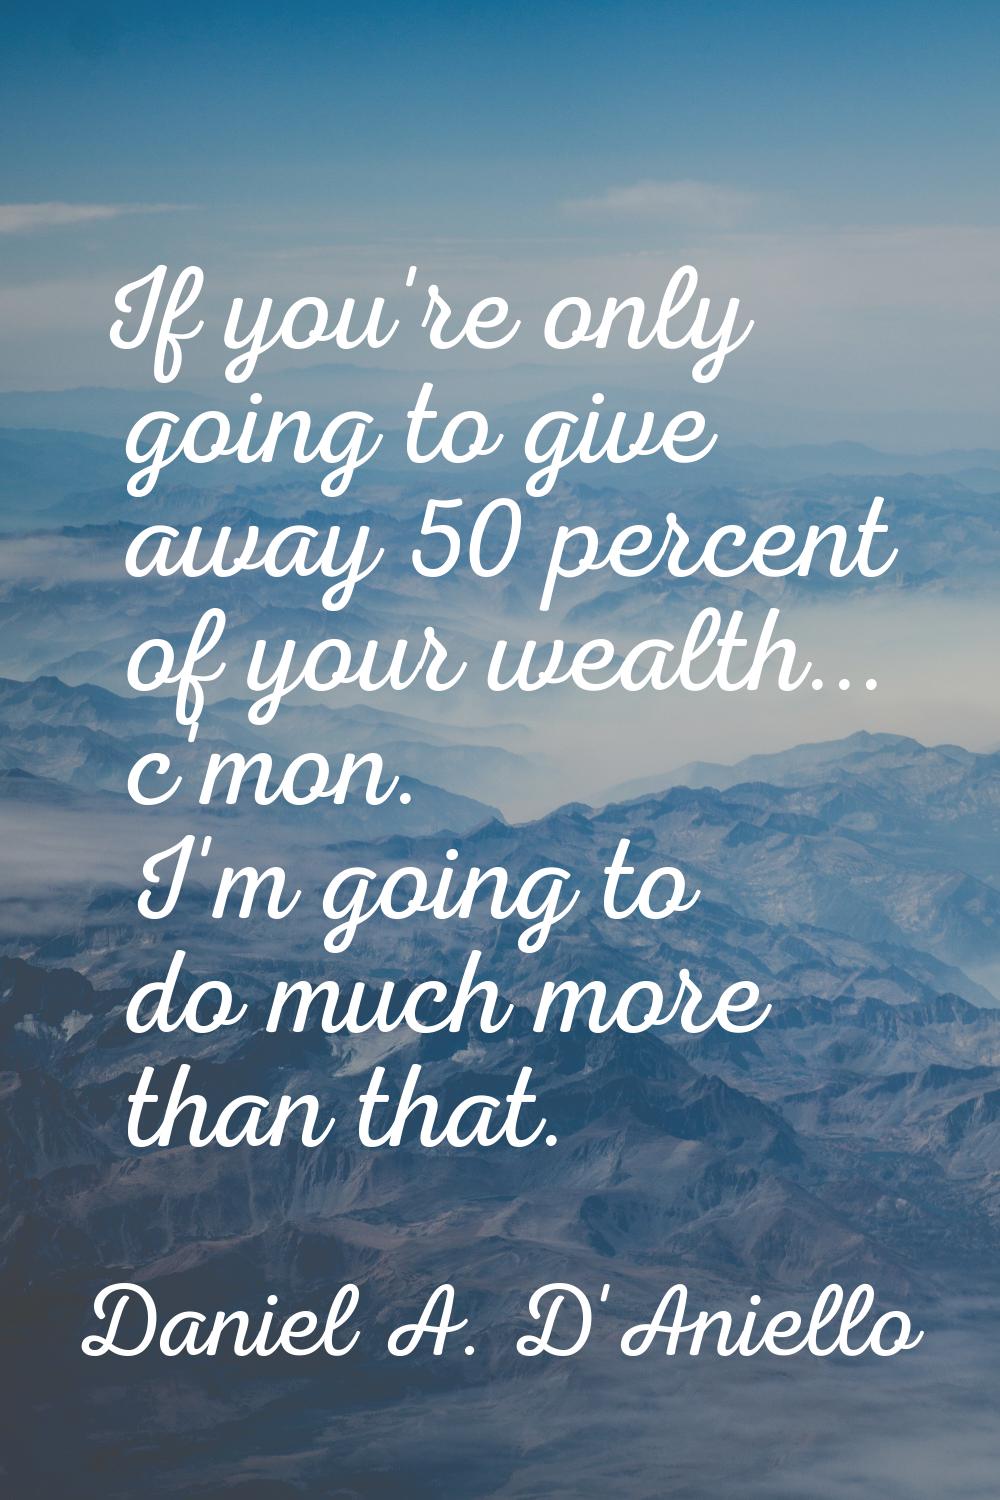 If you're only going to give away 50 percent of your wealth... c'mon. I'm going to do much more tha